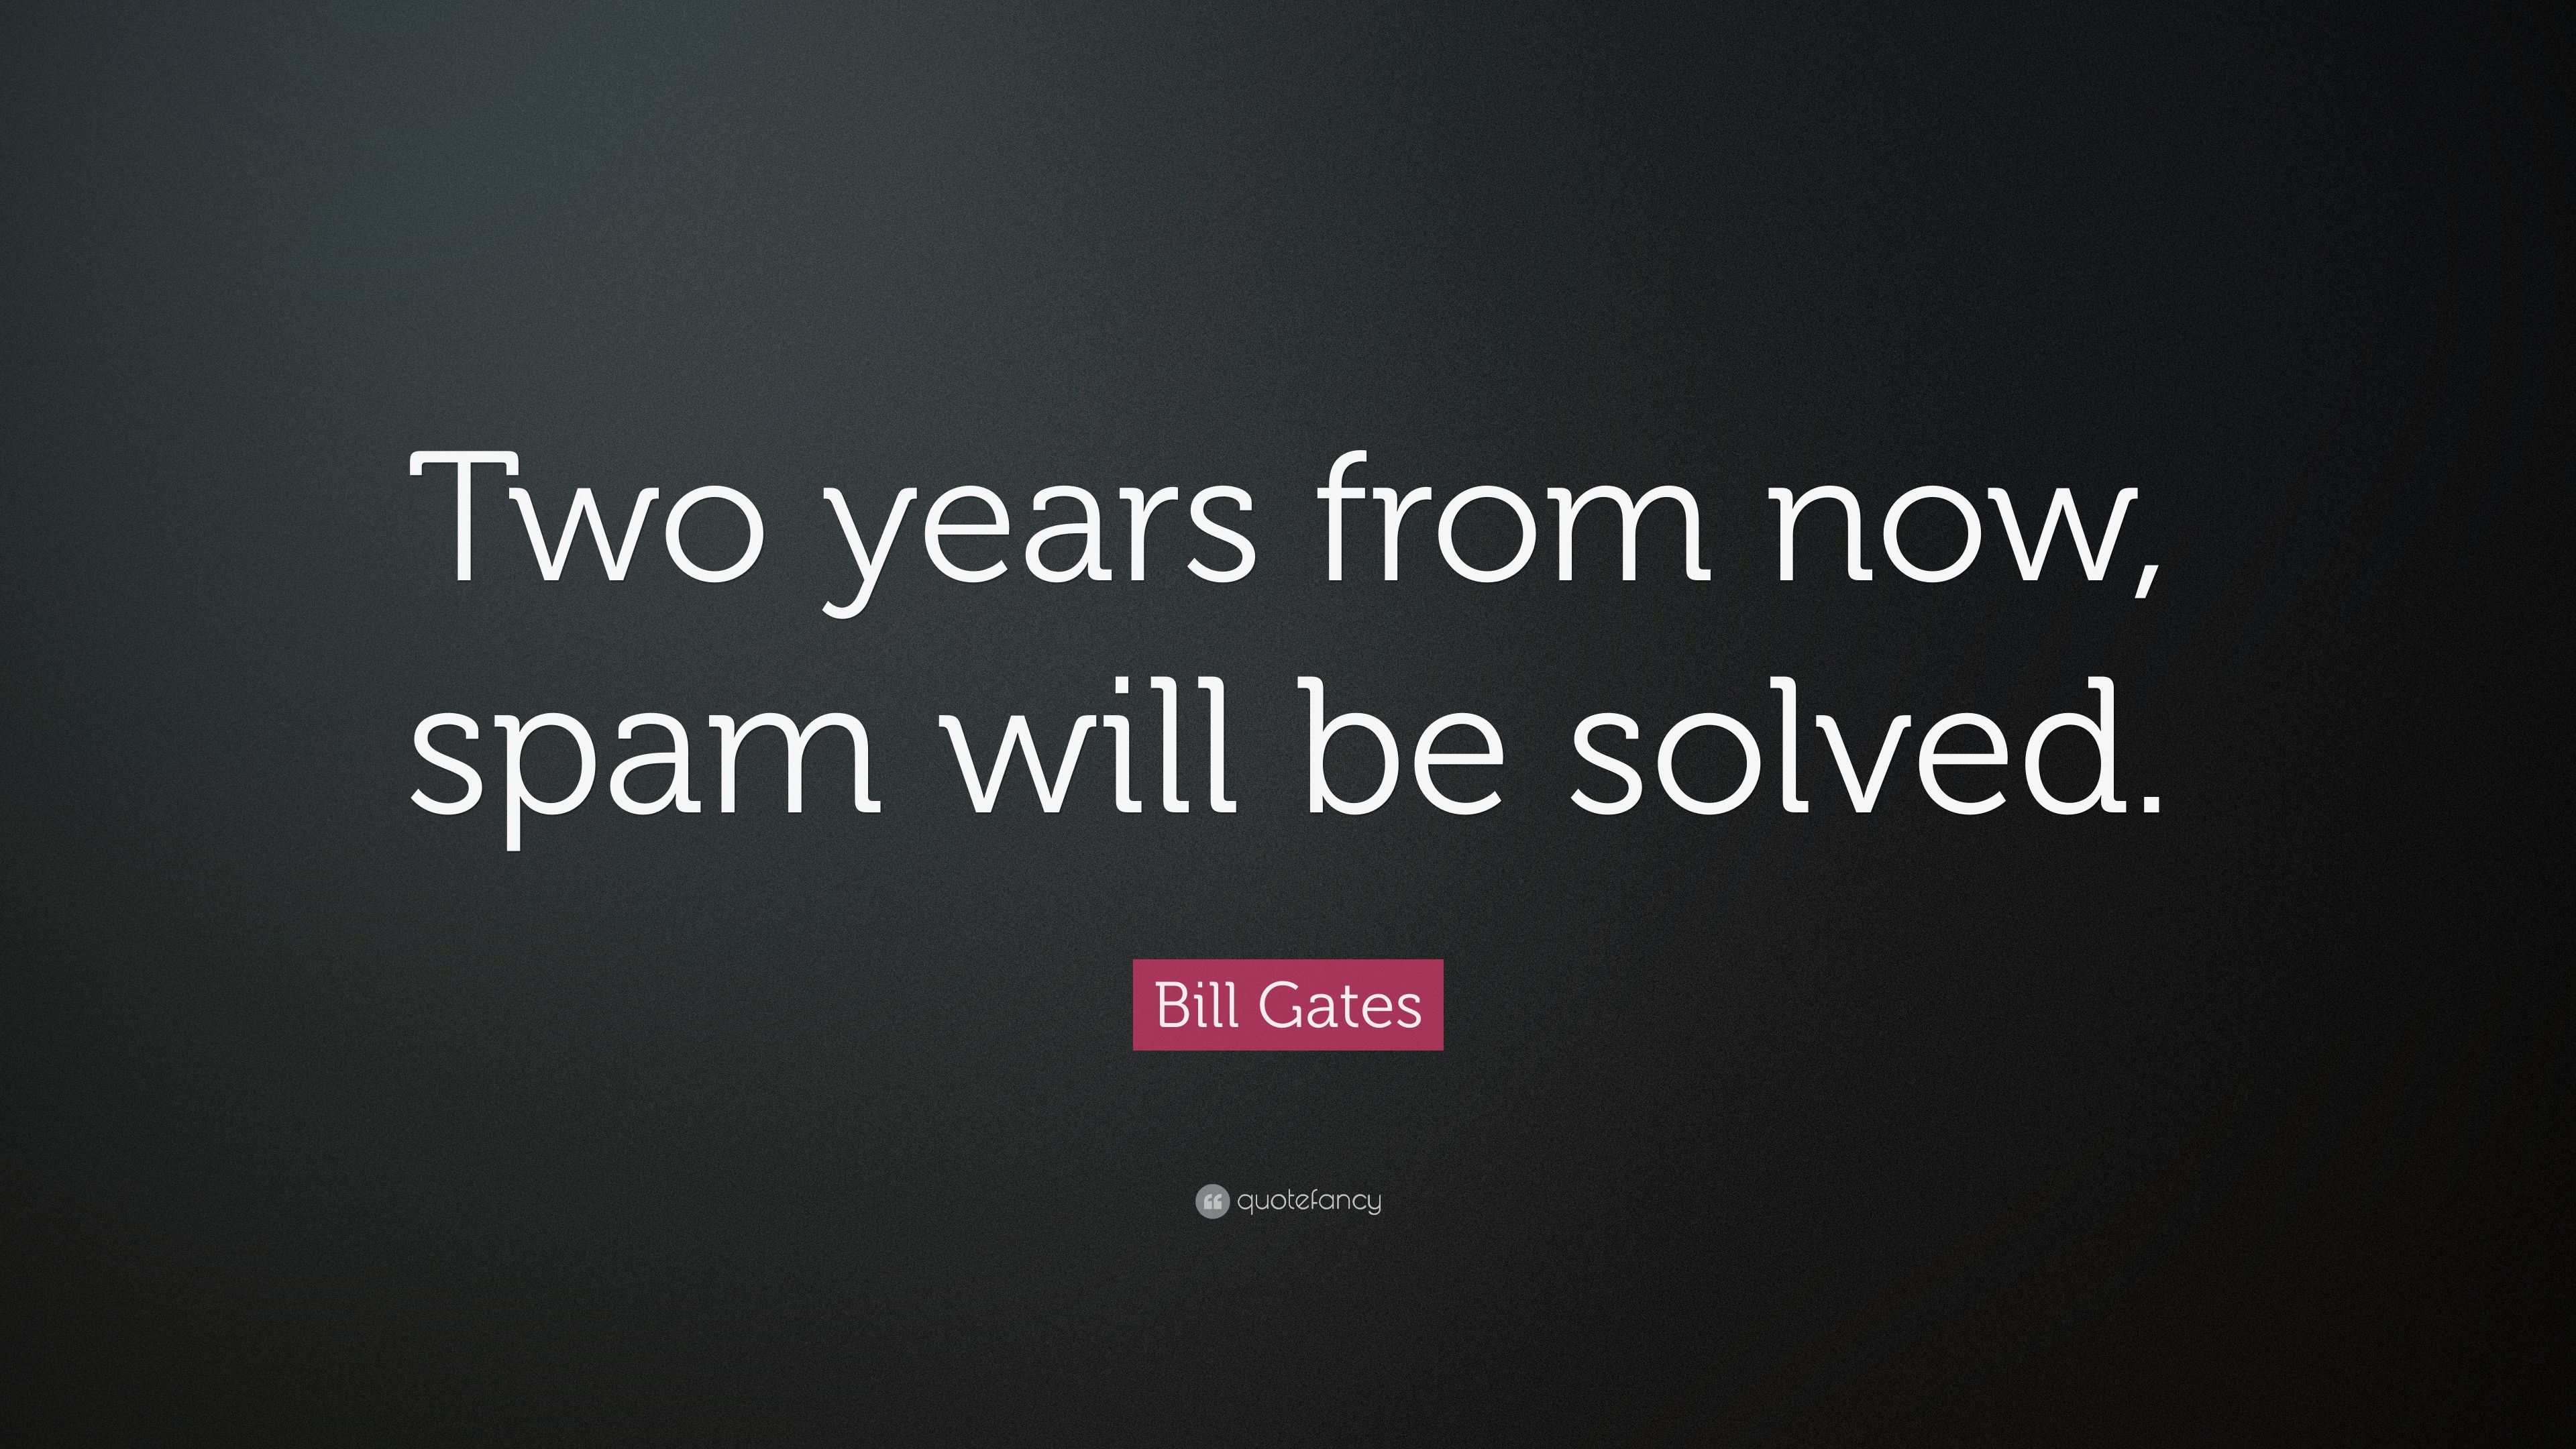 Bill Gates Quote: “Two years from now, spam will be solved.” (10 wallpaper)